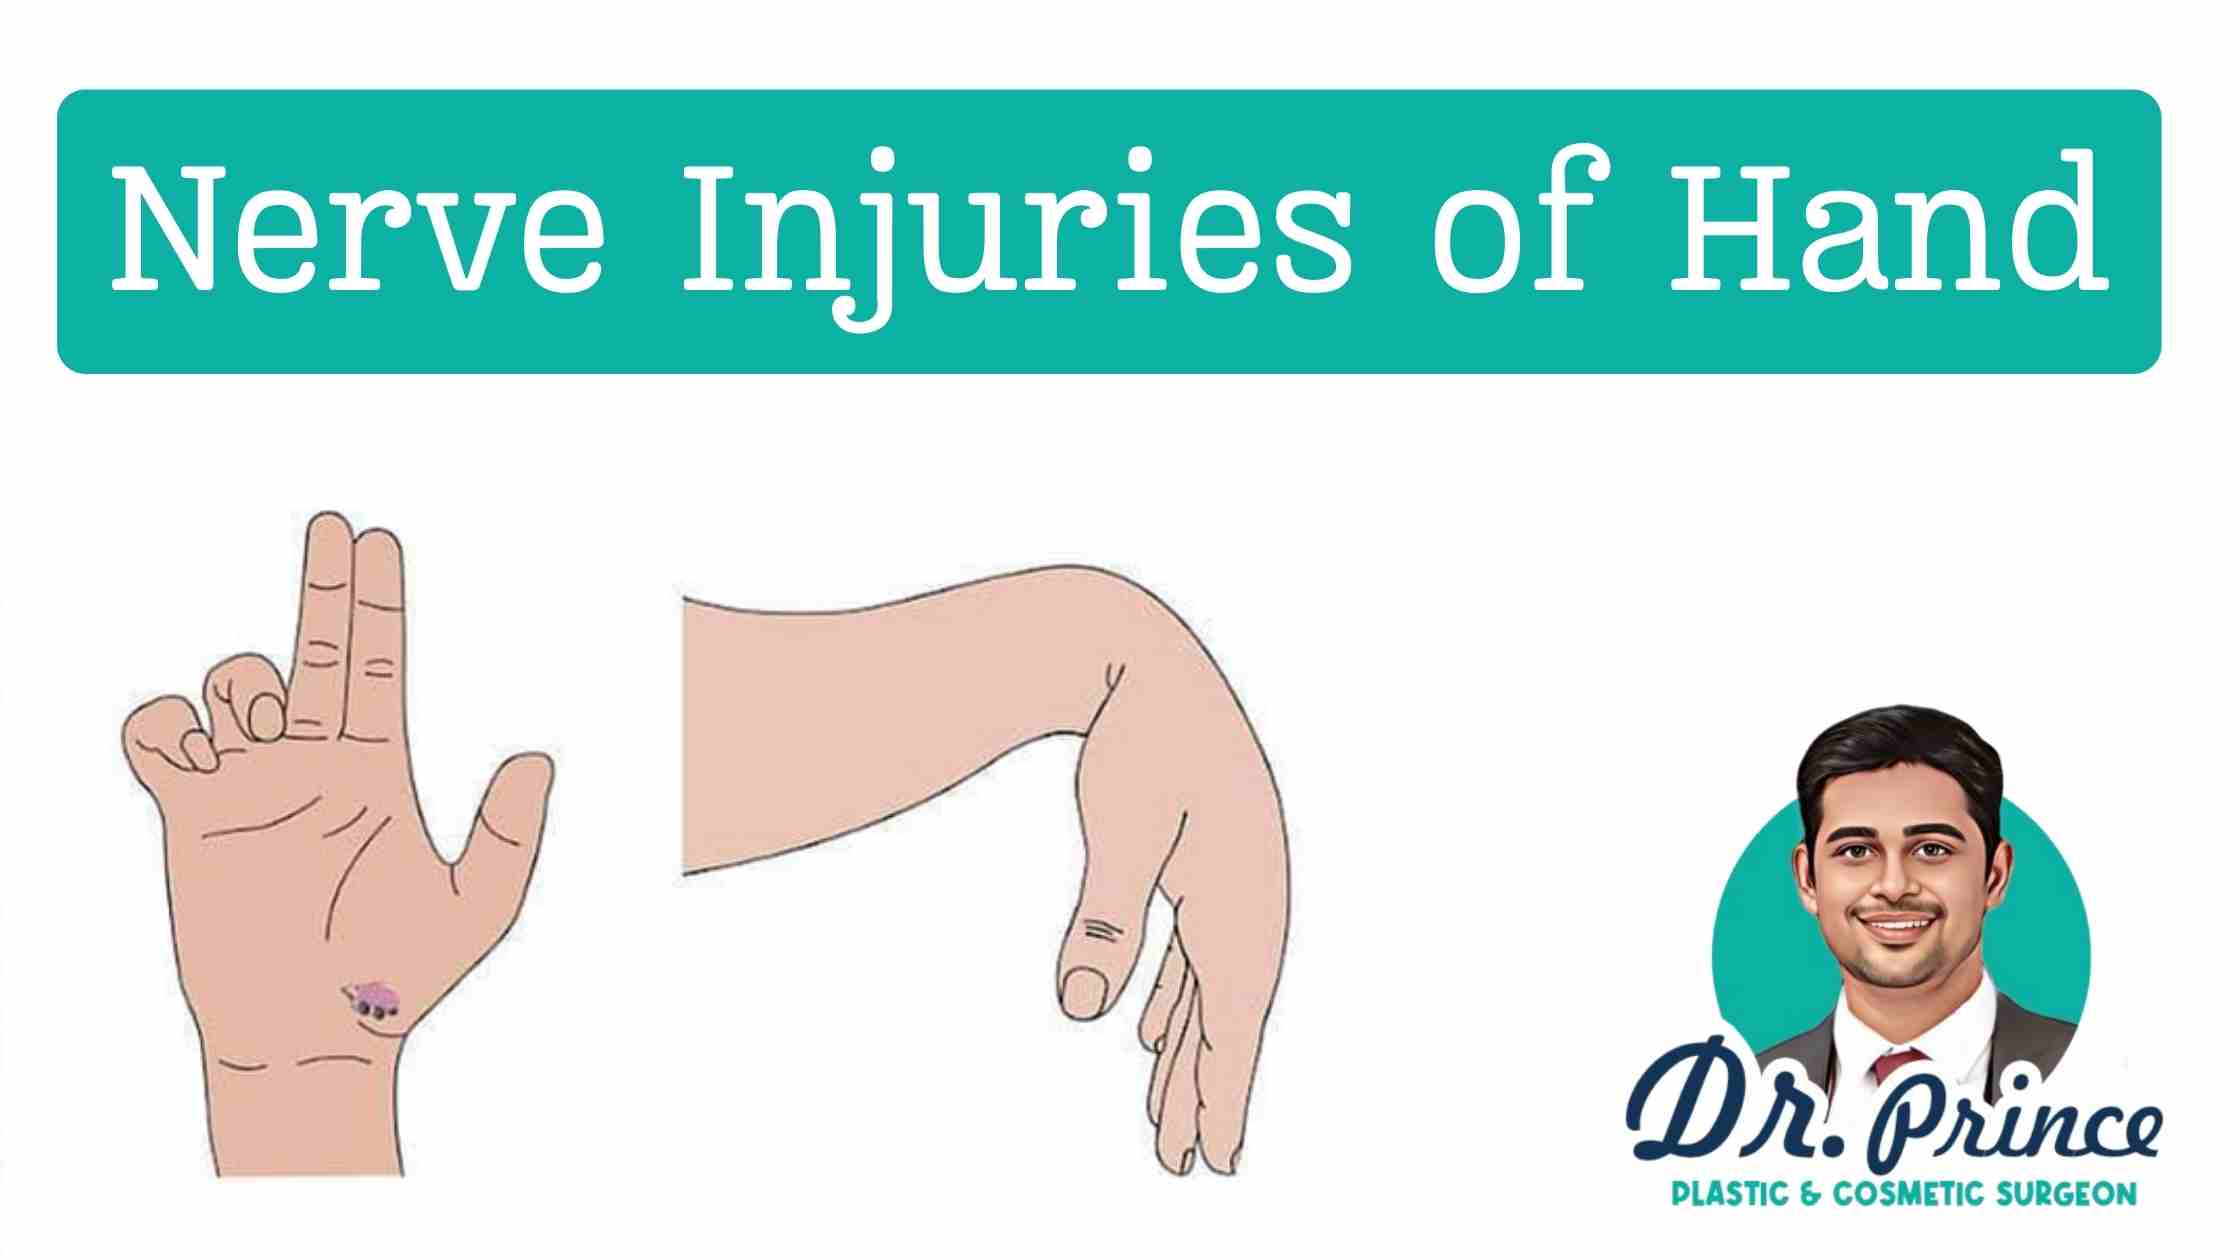 Nerve Injuries of the Hand Specialist - Dr. Prince at Susrutha Hospital, Kerala